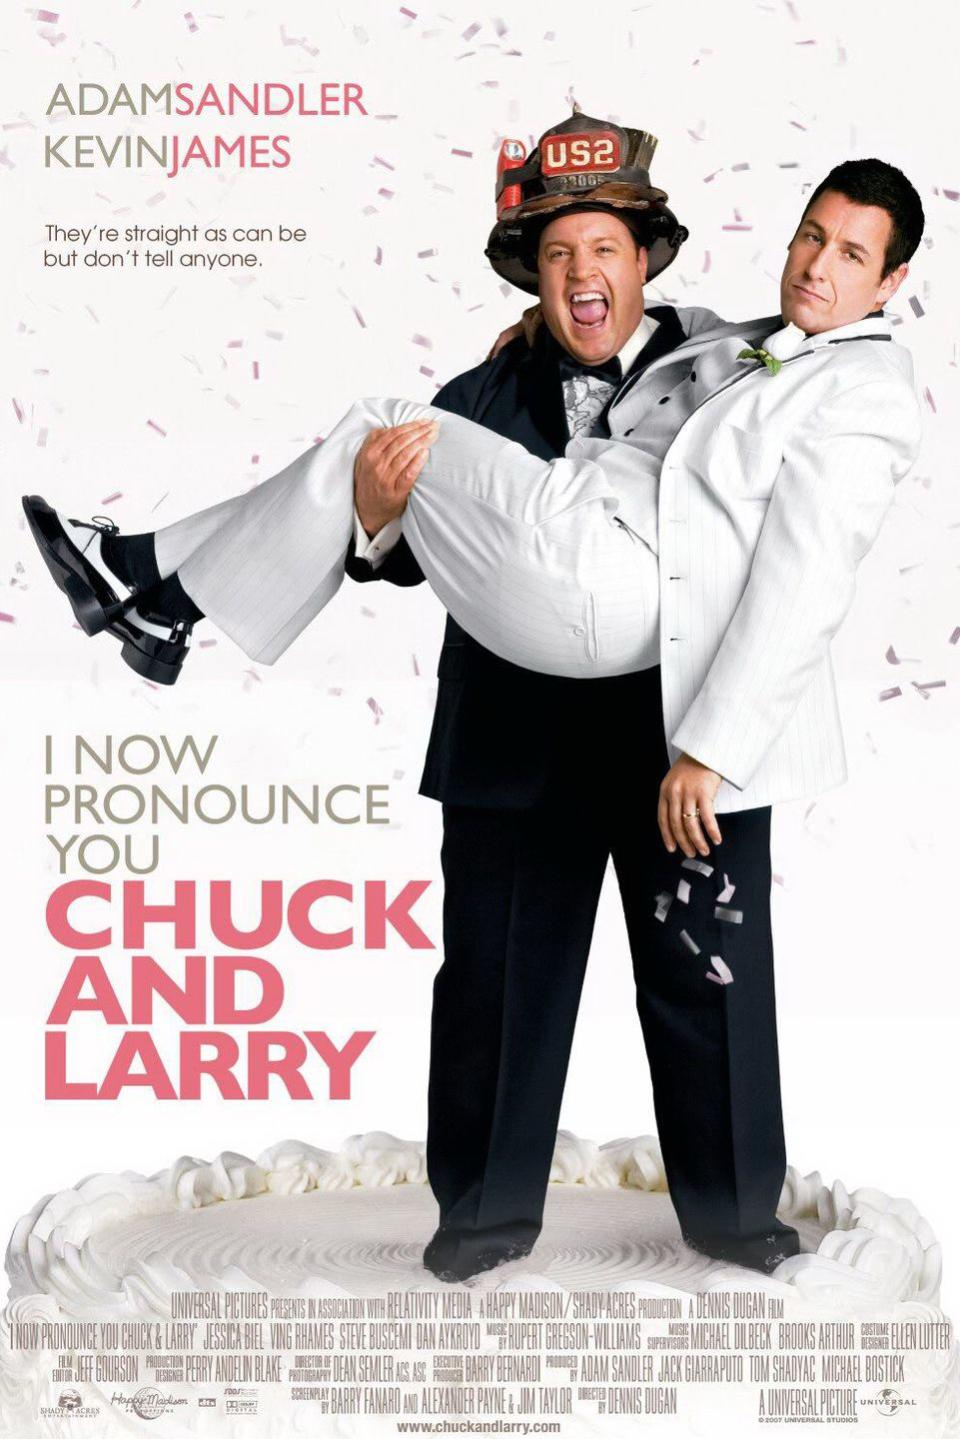 15. I Now Pronounce You Chuck and Larry